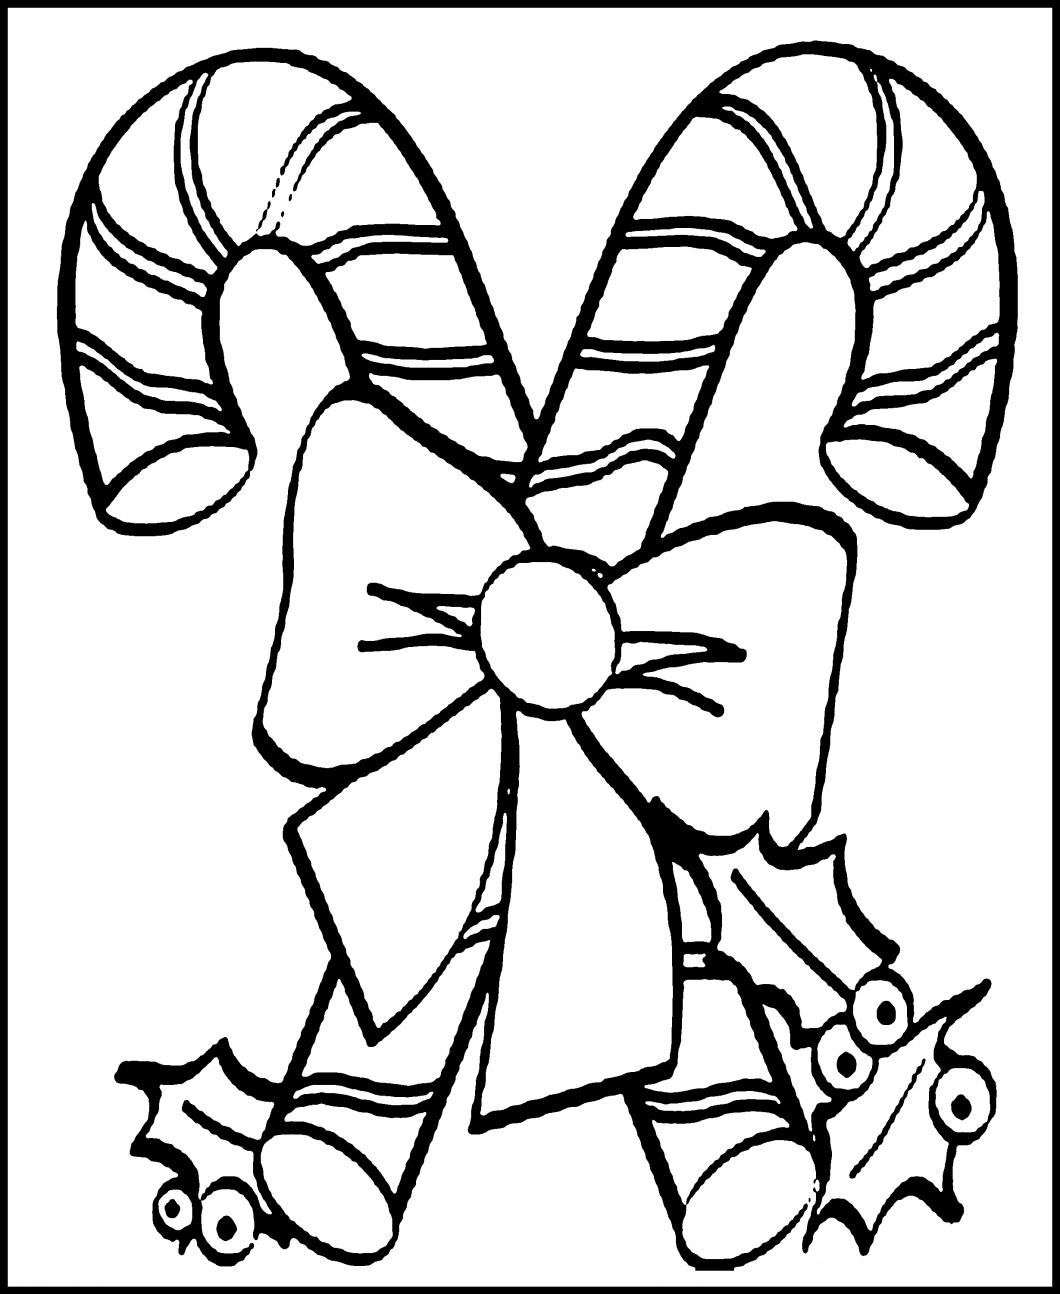 Children's Christmas Coloring Pages Free Coloring Ideas Free Printable Candy Cane Coloring Pages Kids